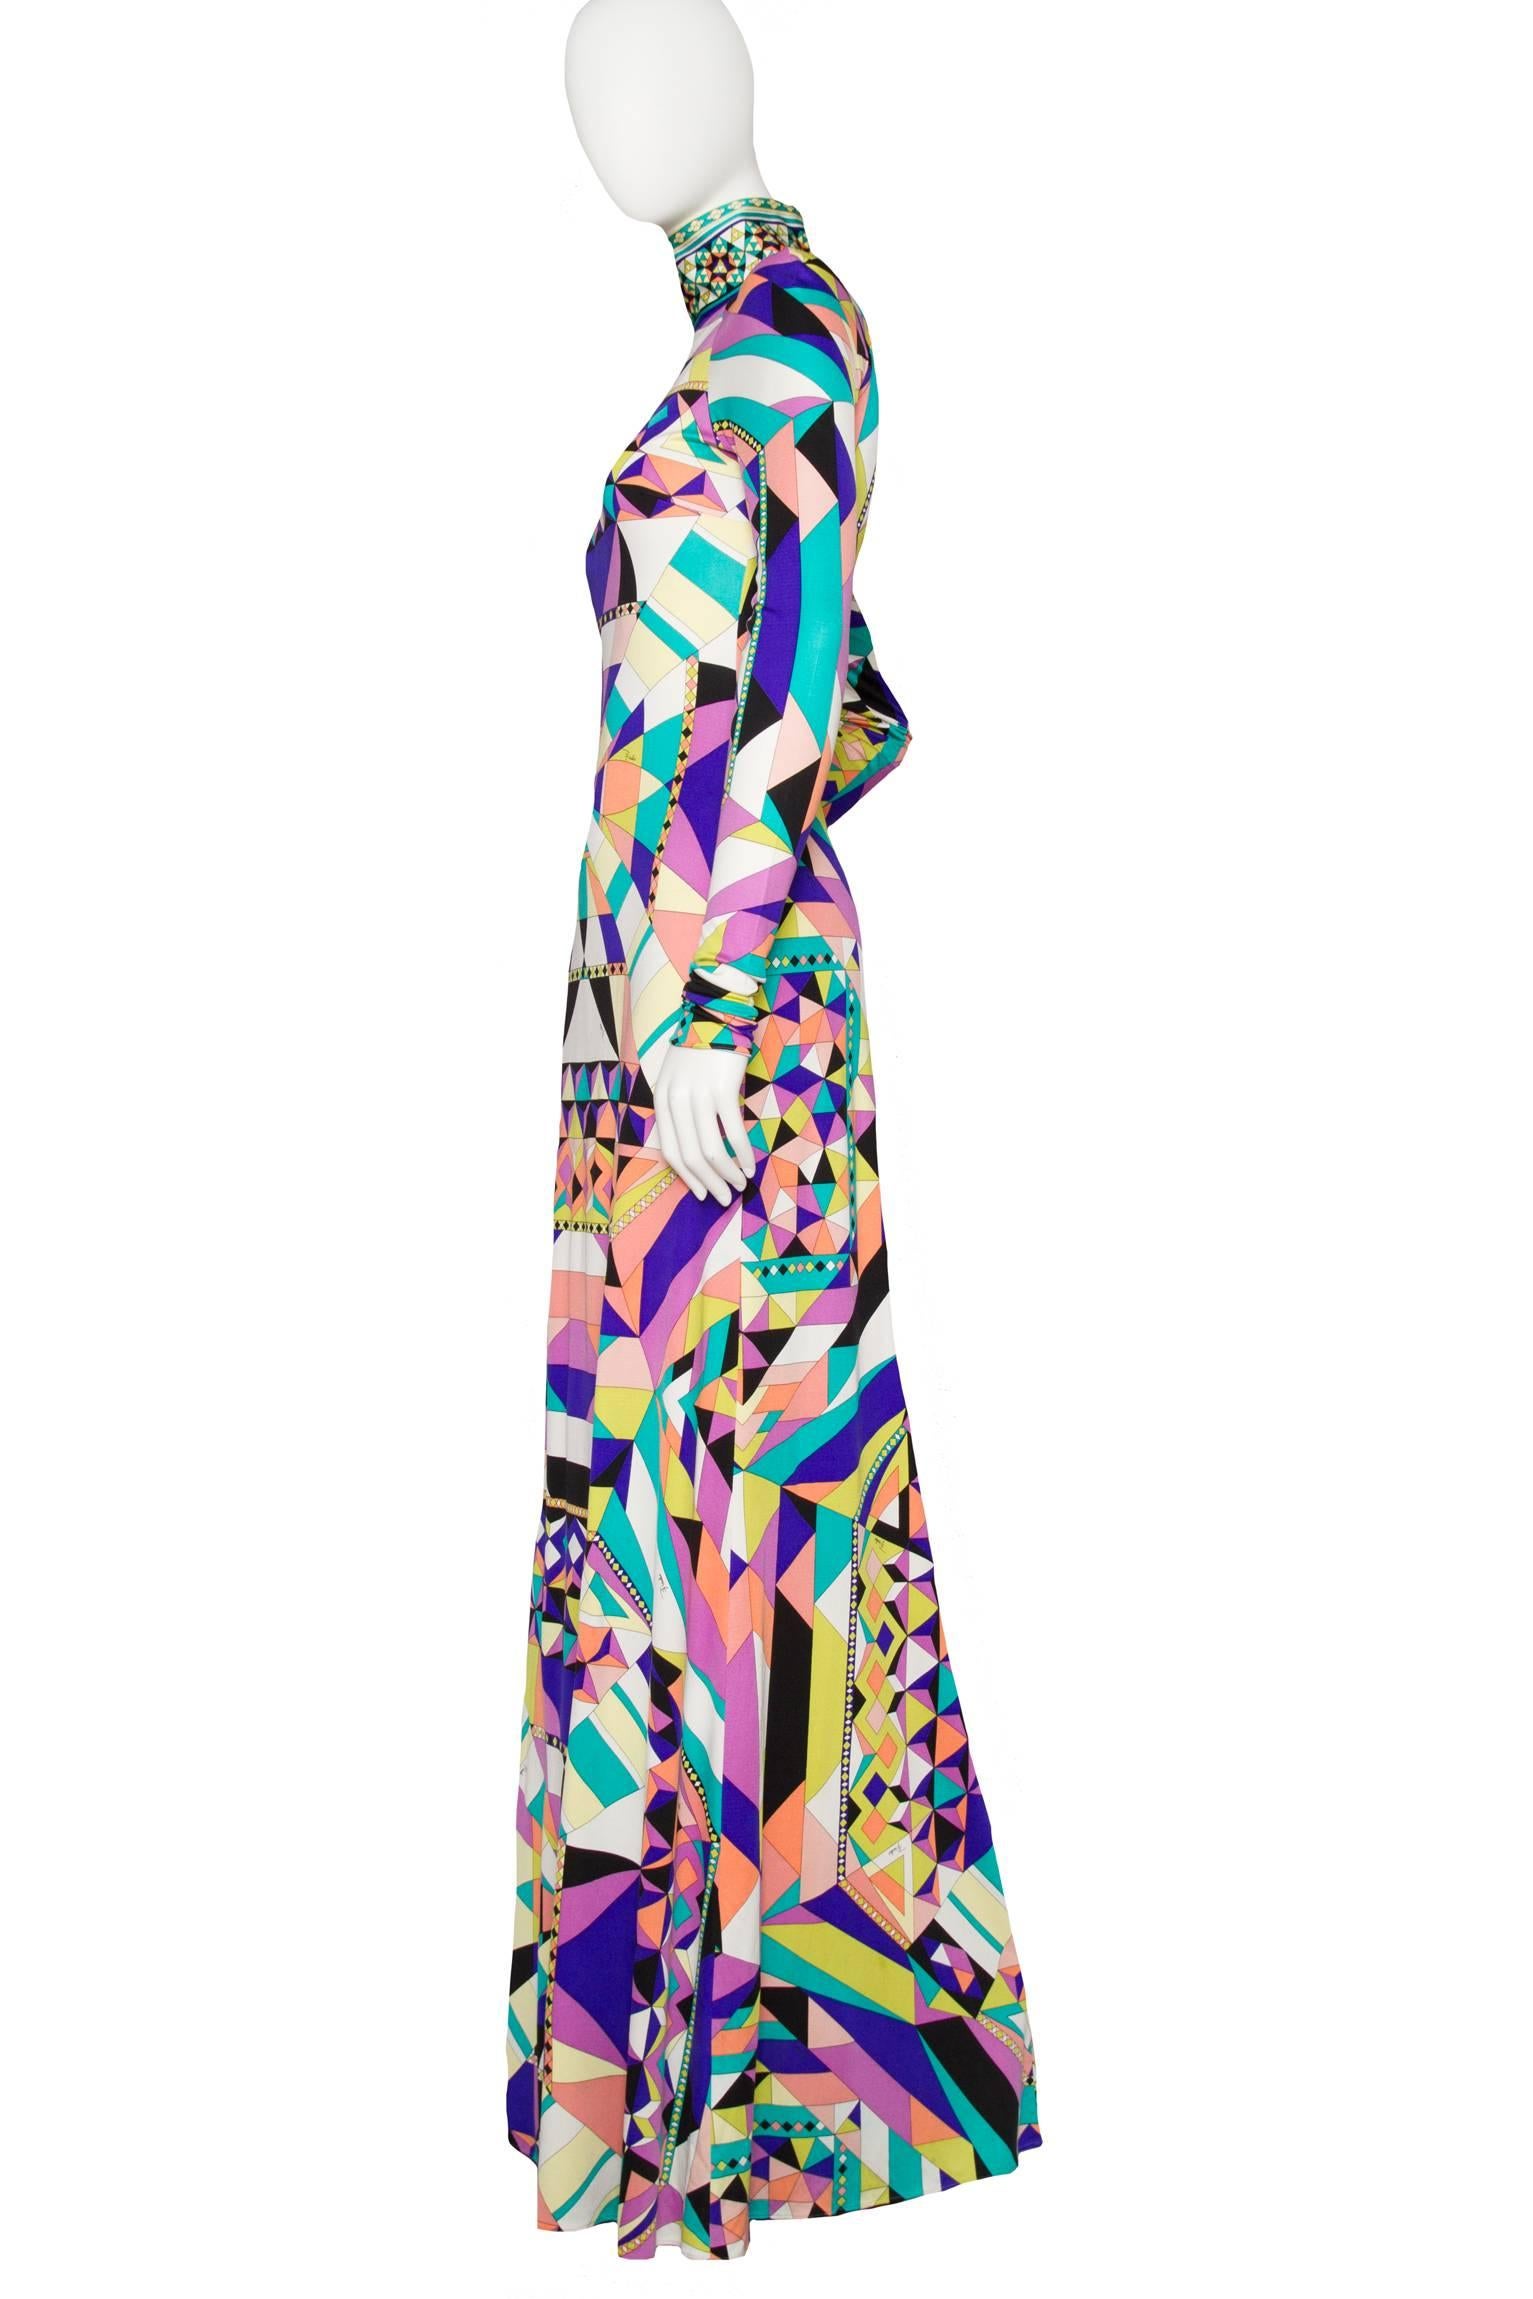 An absolutely incredible Emilio Pucci luscious silk jersey maxi dress with extra long tapered sleeves and a high collar that is fastened at the back with multiple Pucci engraved plastic buttons. The amazing abstract print is held in bright colors